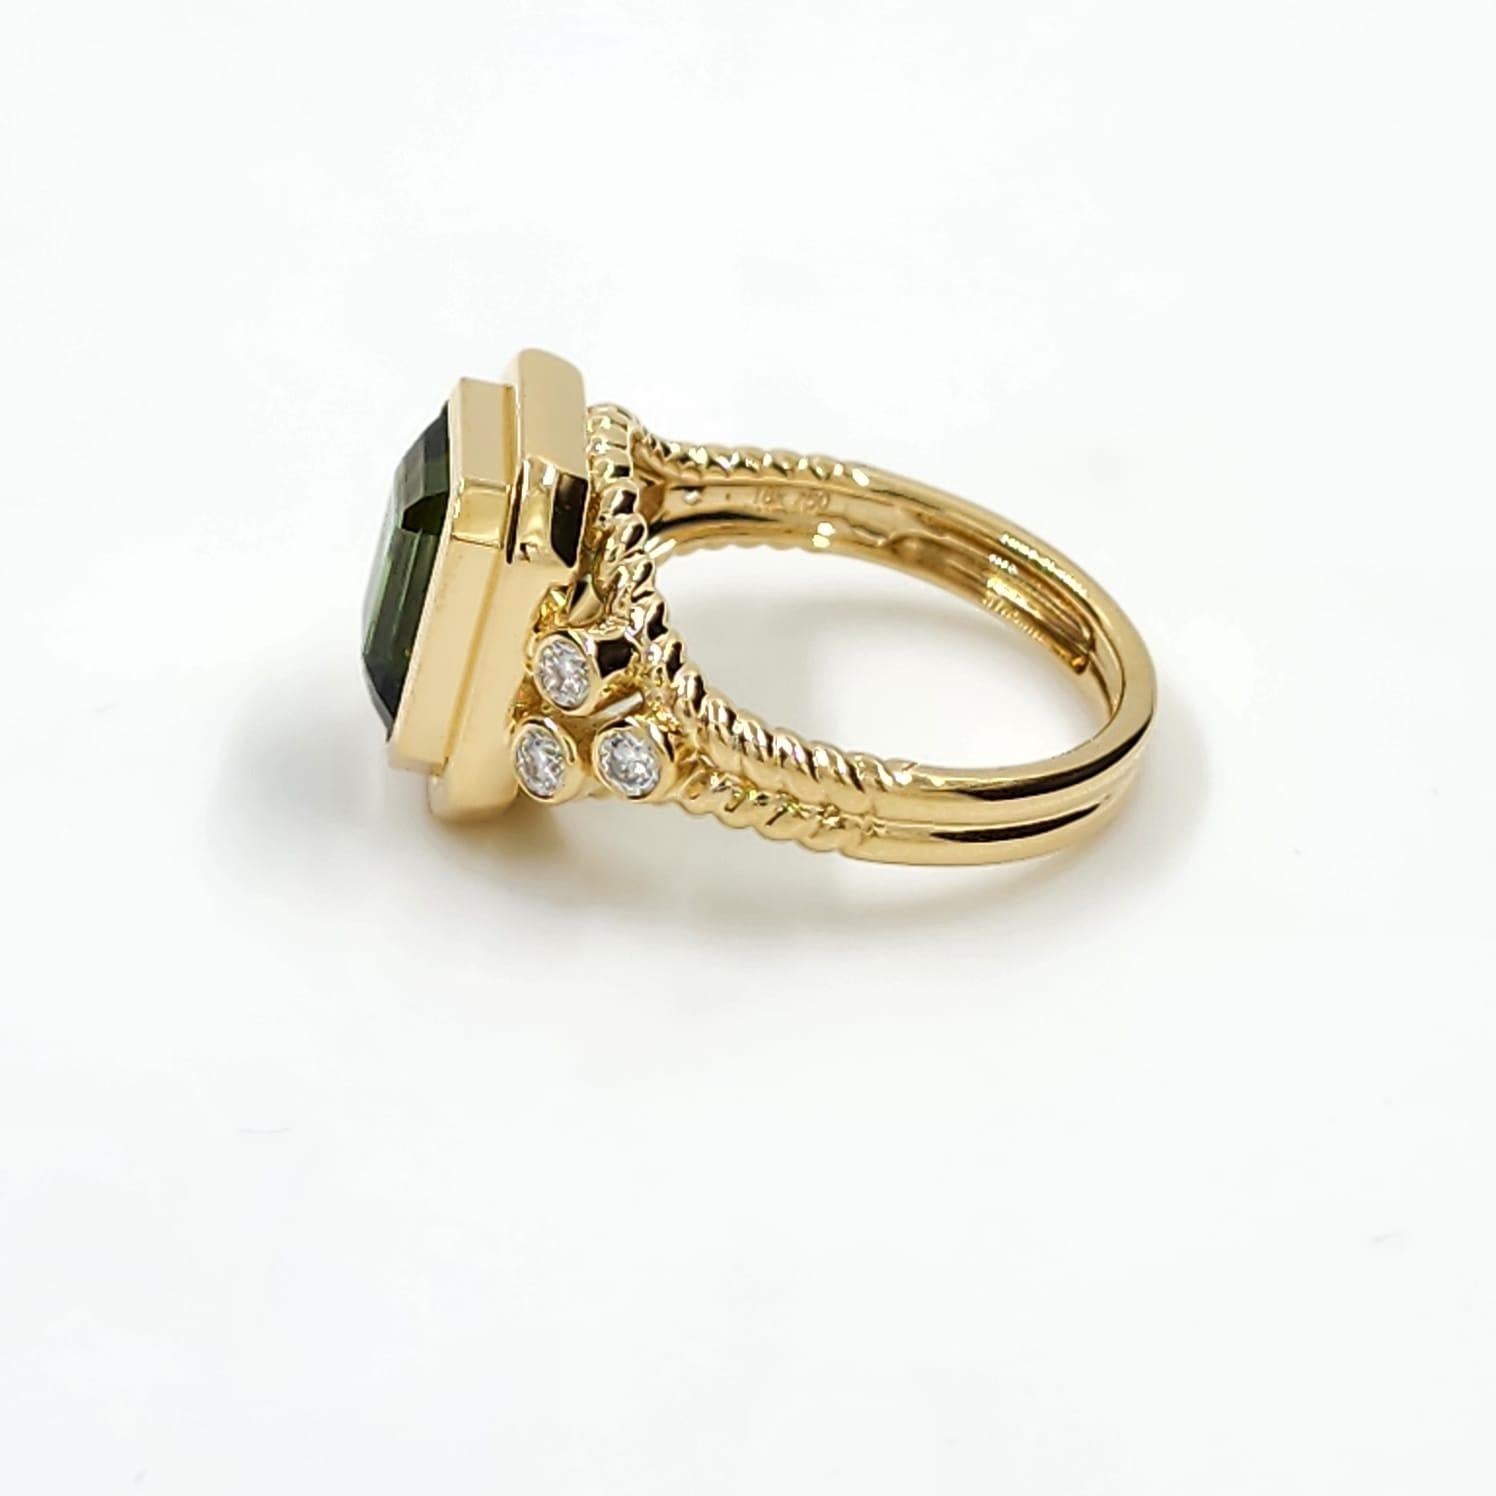 3.72 Carat Green Tourmaline Cocktail Ring in 18K Yellow Gold For Sale 1